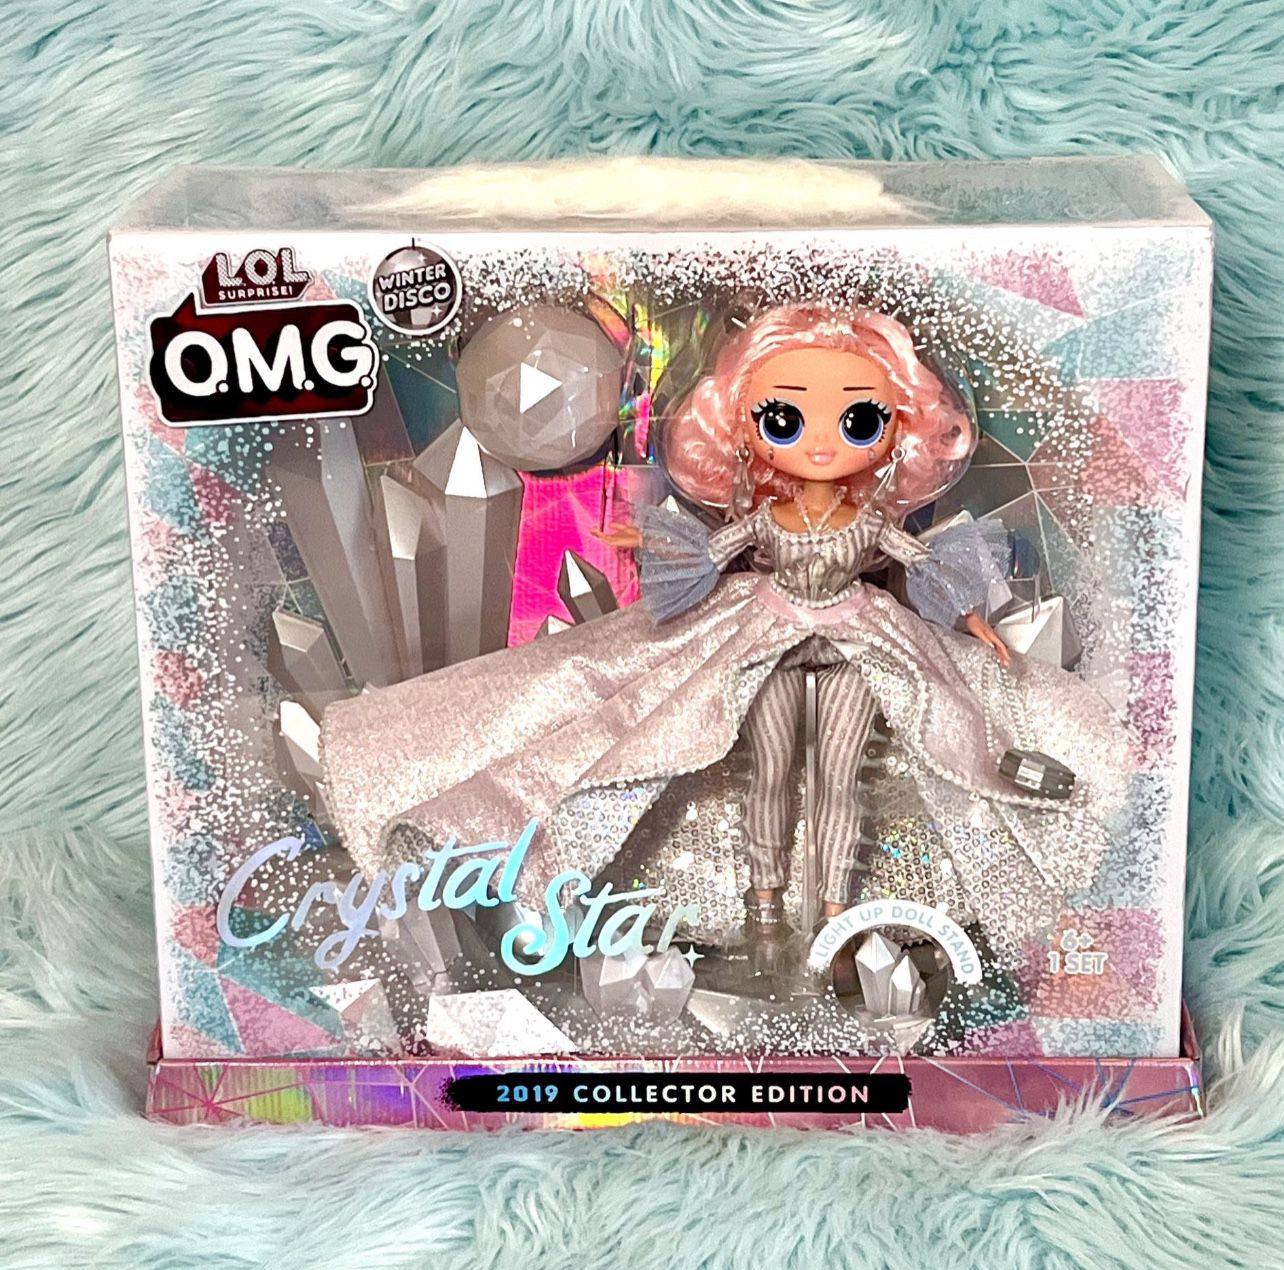 LOL Surprise OMG CRYSTAL STAR 2019 Collector Edition Exclusive Fashion Doll 